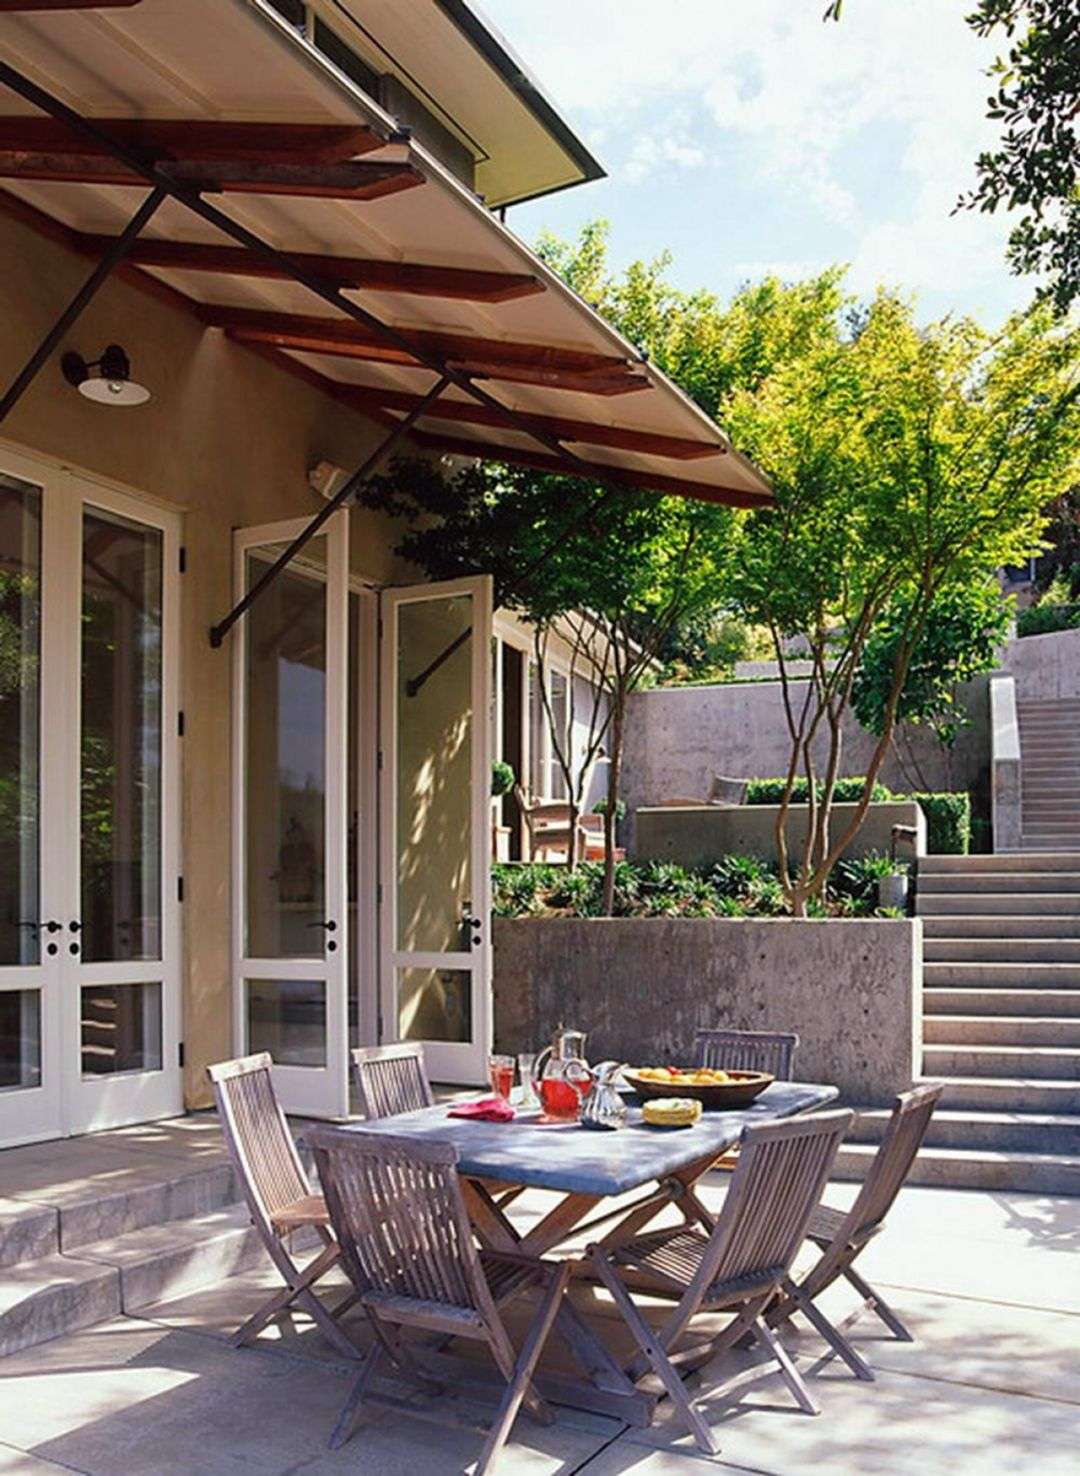 Top 9 Amazing Small Outdoor Patio Design Ideas â€“ PAPPERY